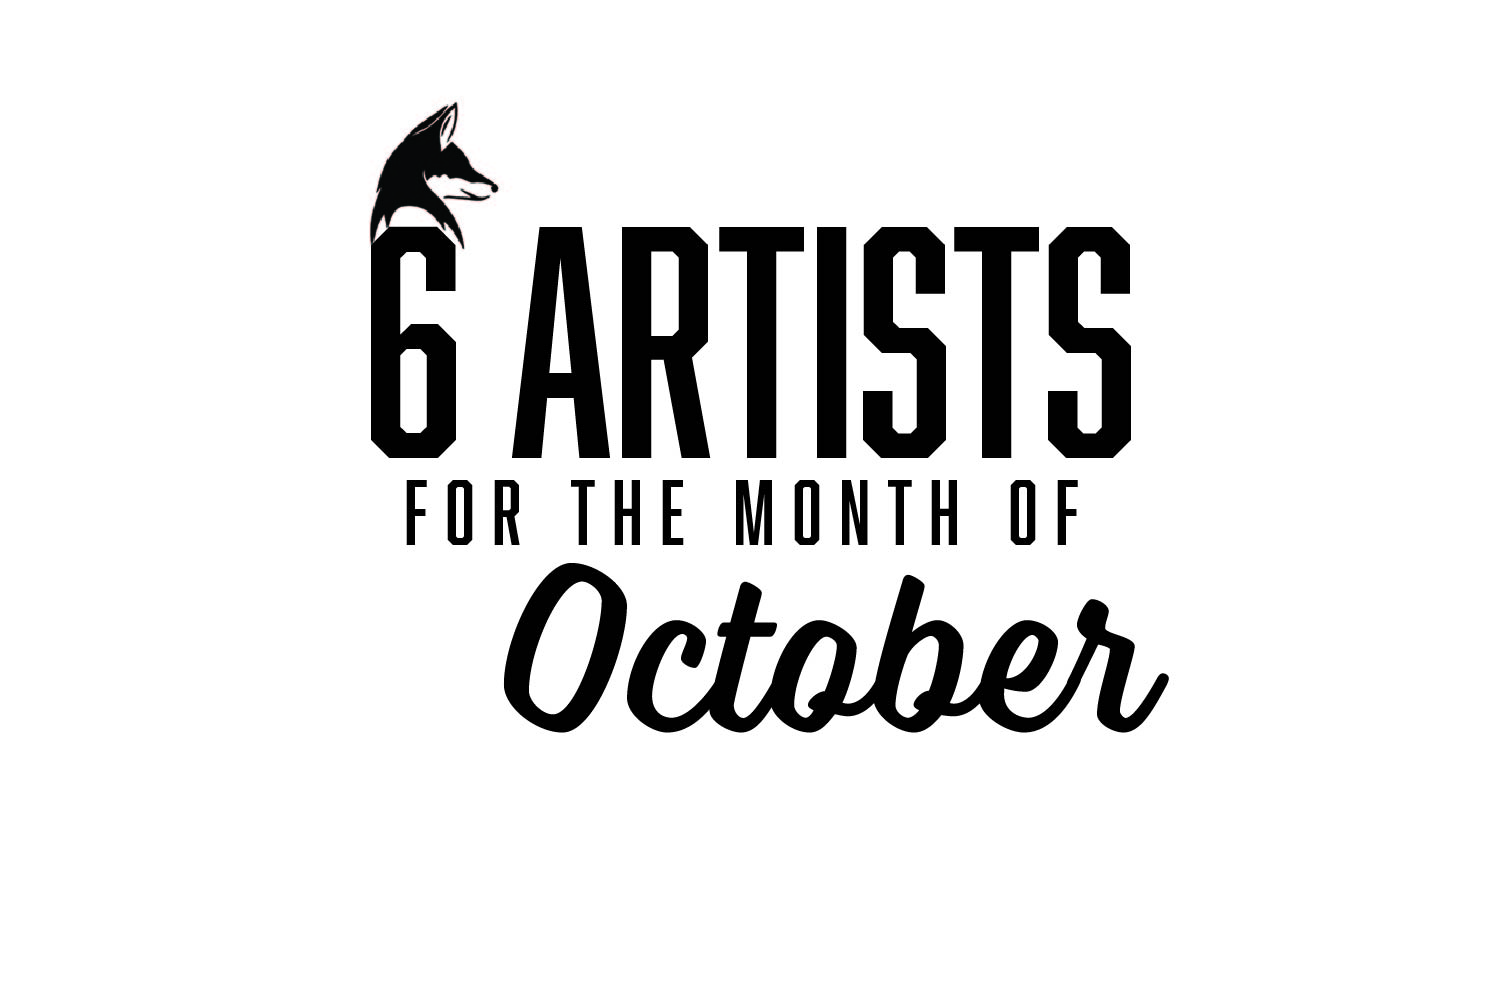 SIX ARTISTS YOU SHOULD BE LISTENING TO: OCTOBER 2022